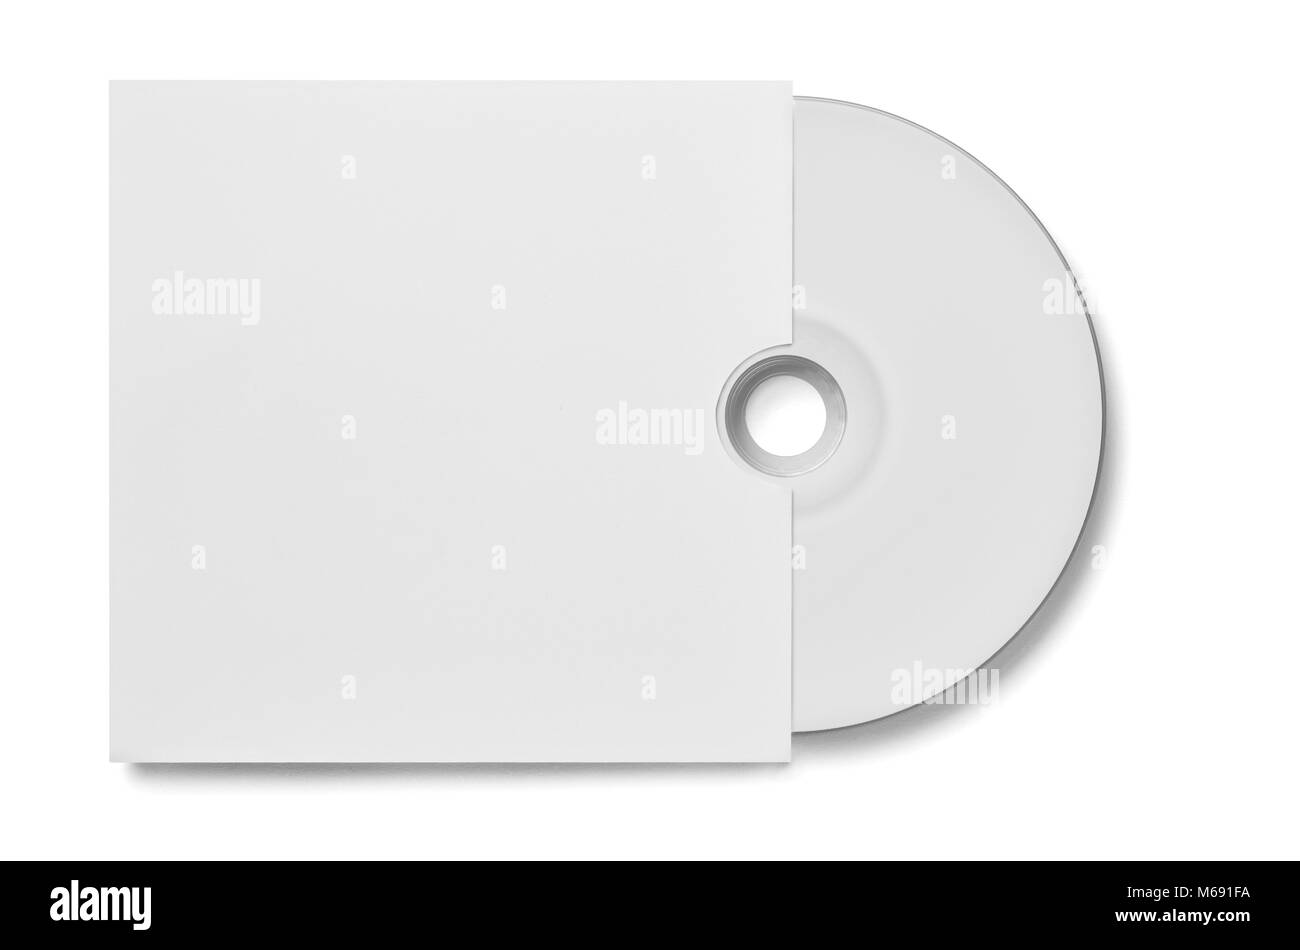 close up of a cd dvd disc on white background Stock Photo